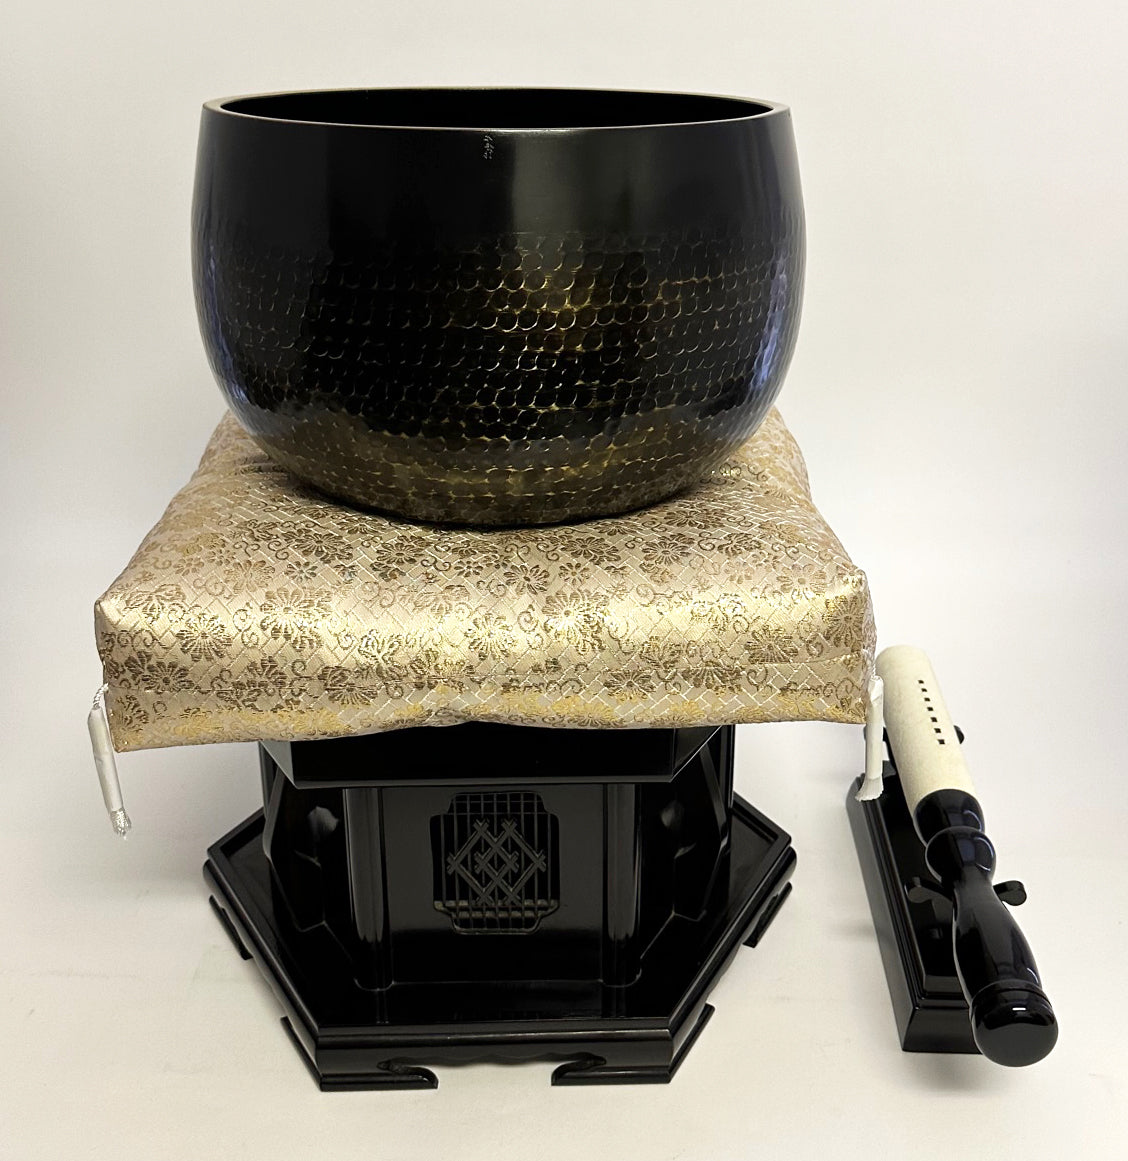 No. 10 Hand Pounded Bell (13" Diameter) with Ebony Hexagonal Wooden Base and Gold Cushion with Bell Stick Set